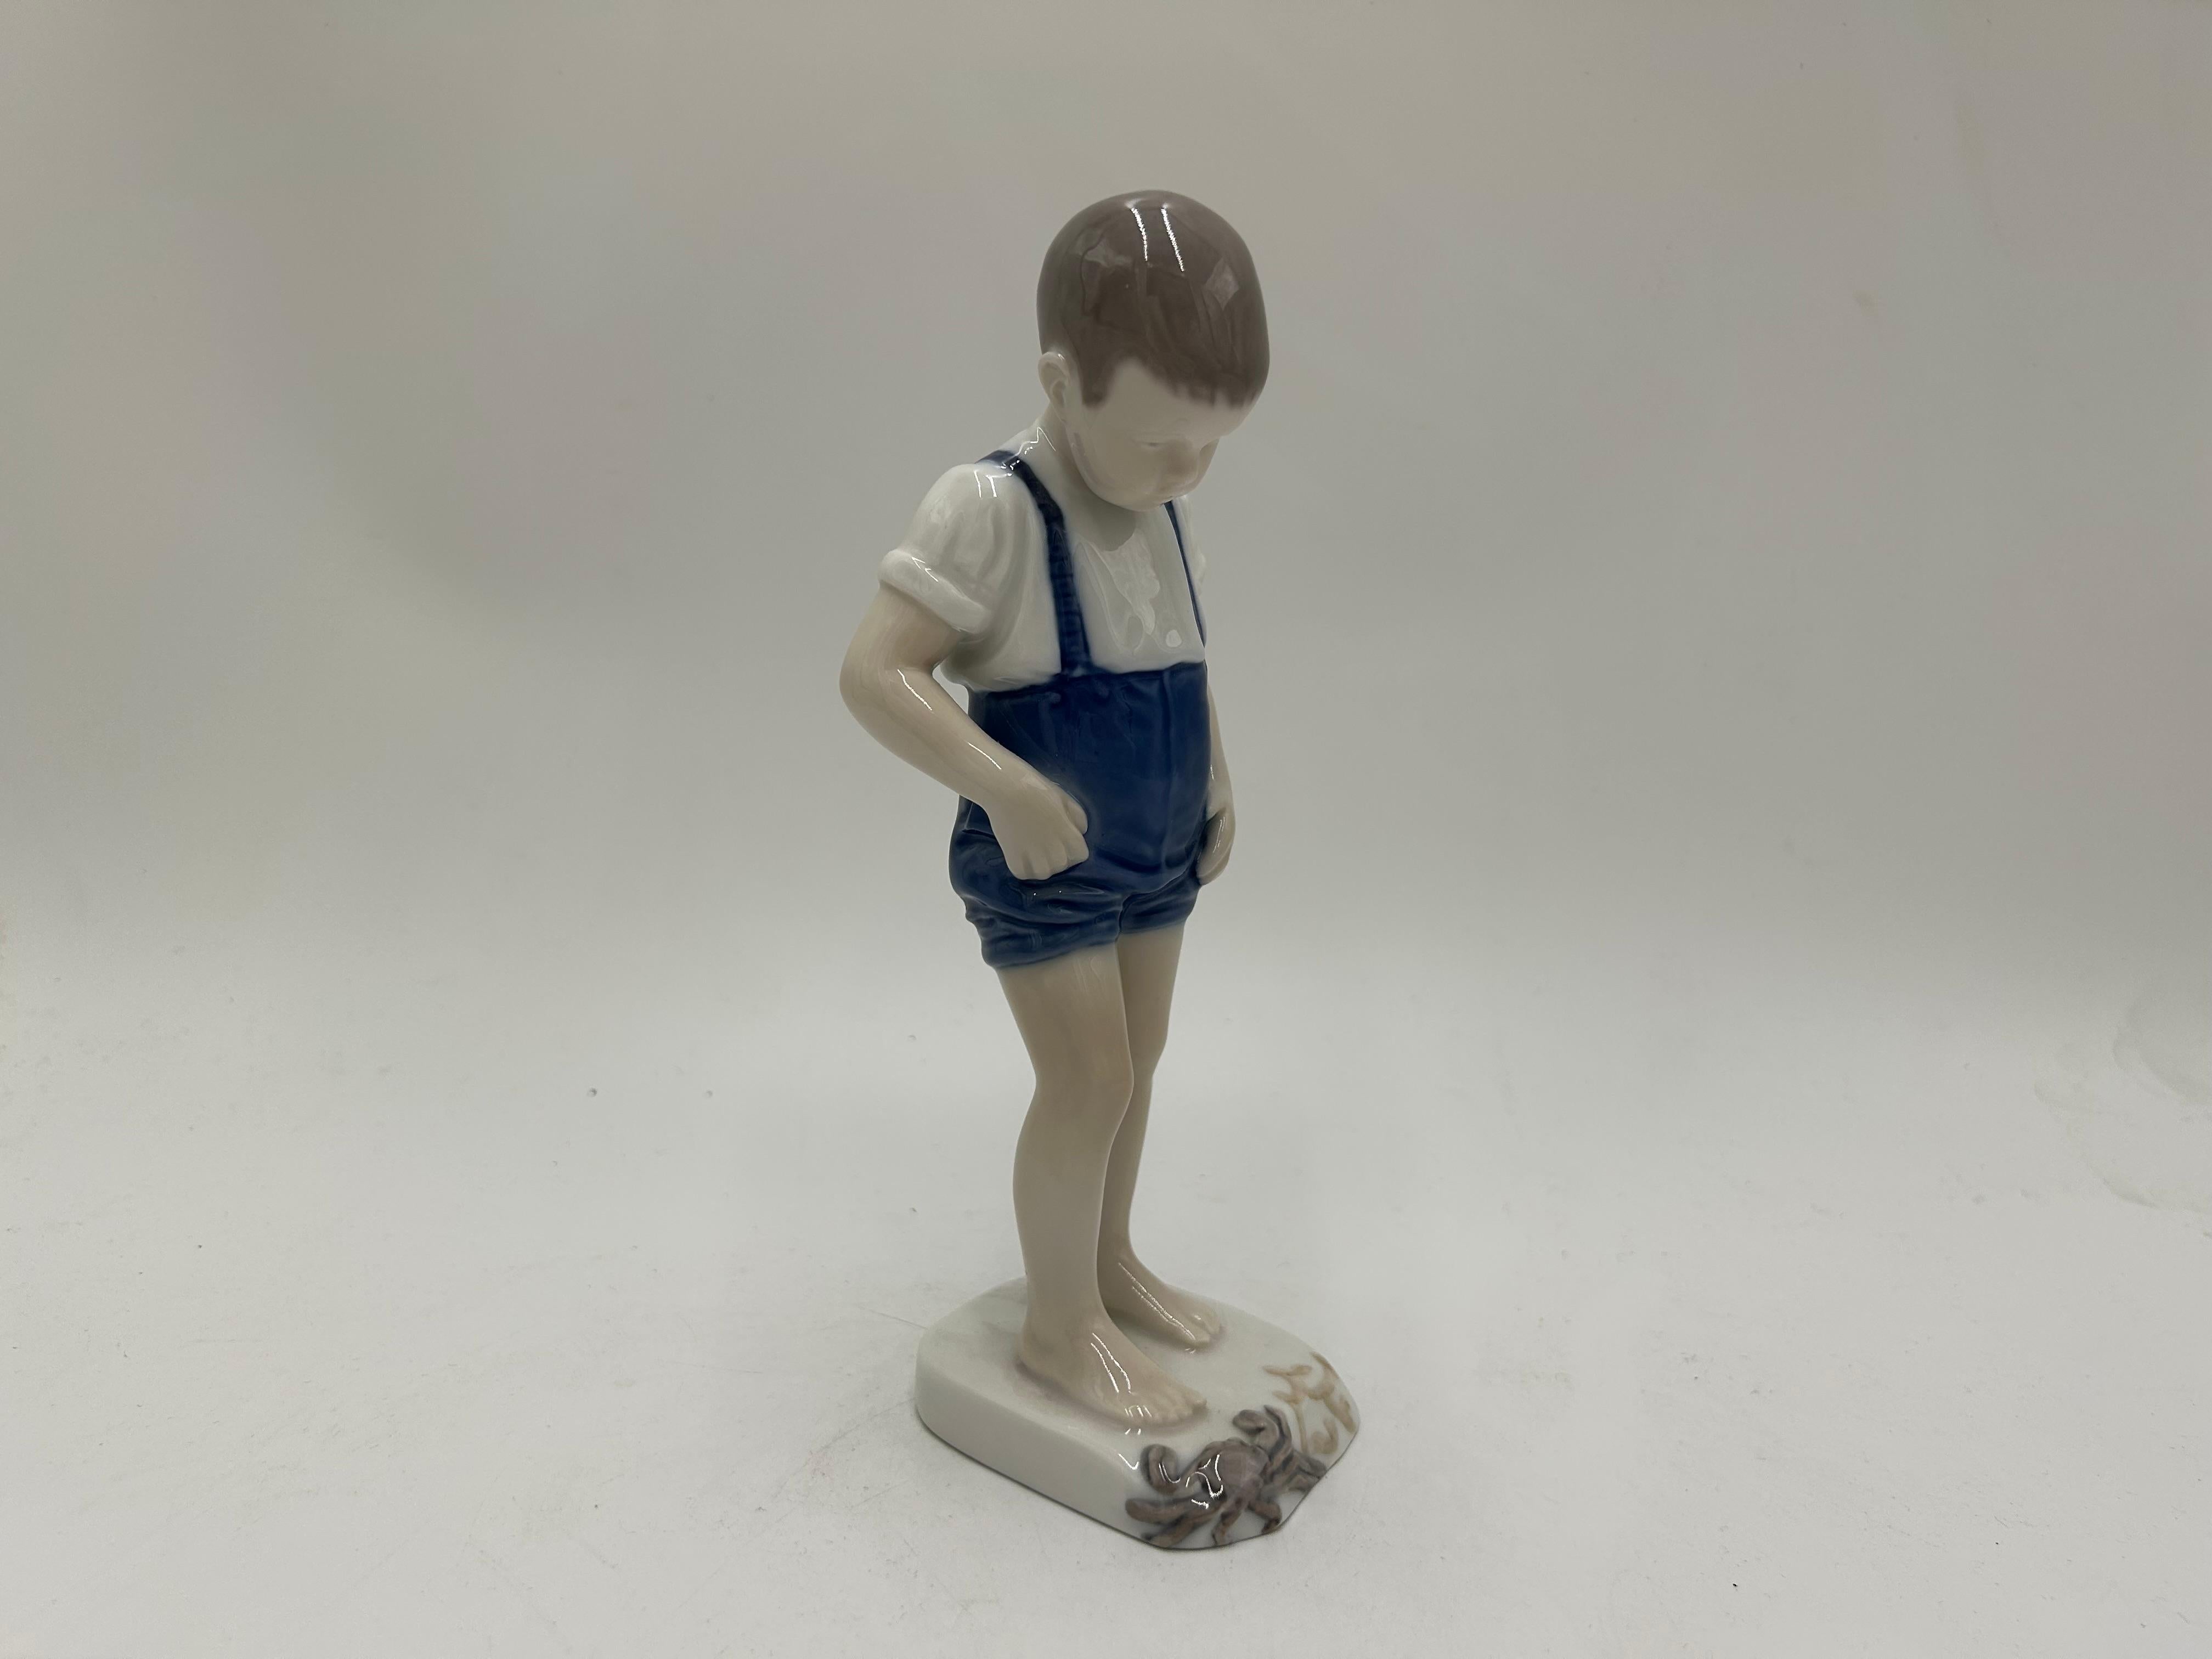 Porcelain figurine of a boy with a crab
Produced by the Danish manufactory Bing & Grondahl.
Mark used in 1948-1952.
Very good condition, no damage
Measures: Height: 20cm
Width: 6cm
Depth: 6cm.